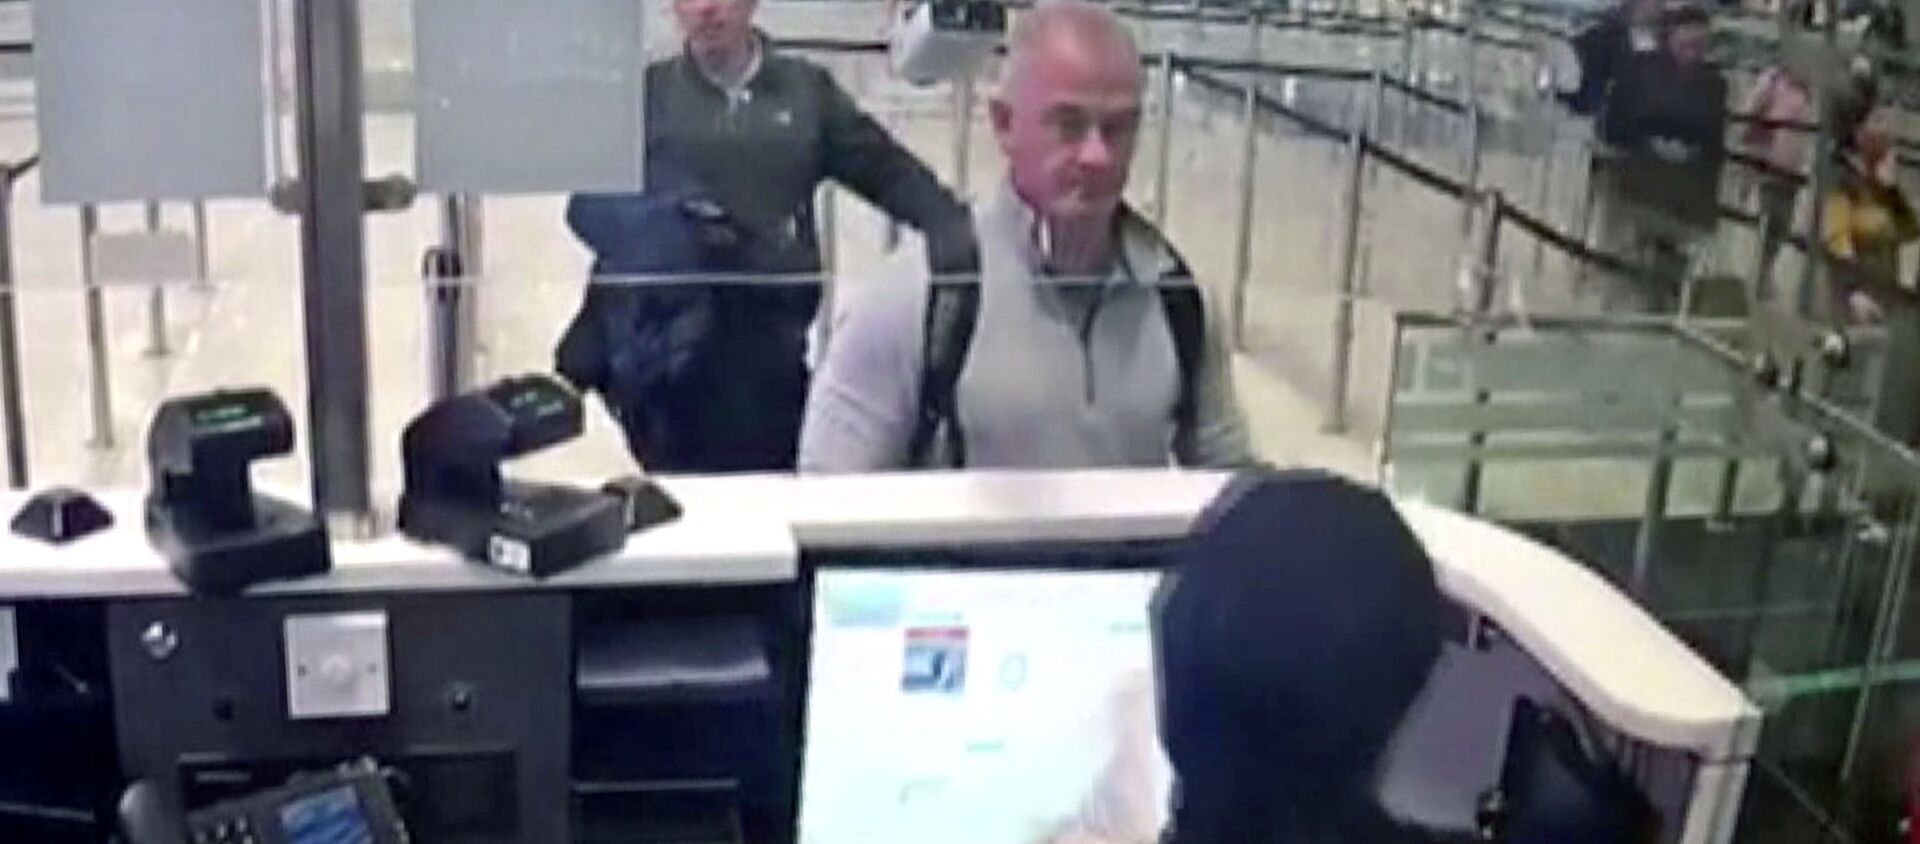 This Dec. 30, 2019 image from security camera video shows Michael L. Taylor, center, and George-Antoine Zayek at passport control at Istanbul Airport in Turkey. The U.S. State Department has agreed to turn over to Japan Taylor and his son Peter Taylor, who are accused of smuggling former Nissan Motor Co. Chairman Carlos Ghosn out of the country while he was awaiting trial, the men's lawyers said in legal filing on Thursday, Oct. 29, 2020 - Sputnik International, 1920, 14.06.2021